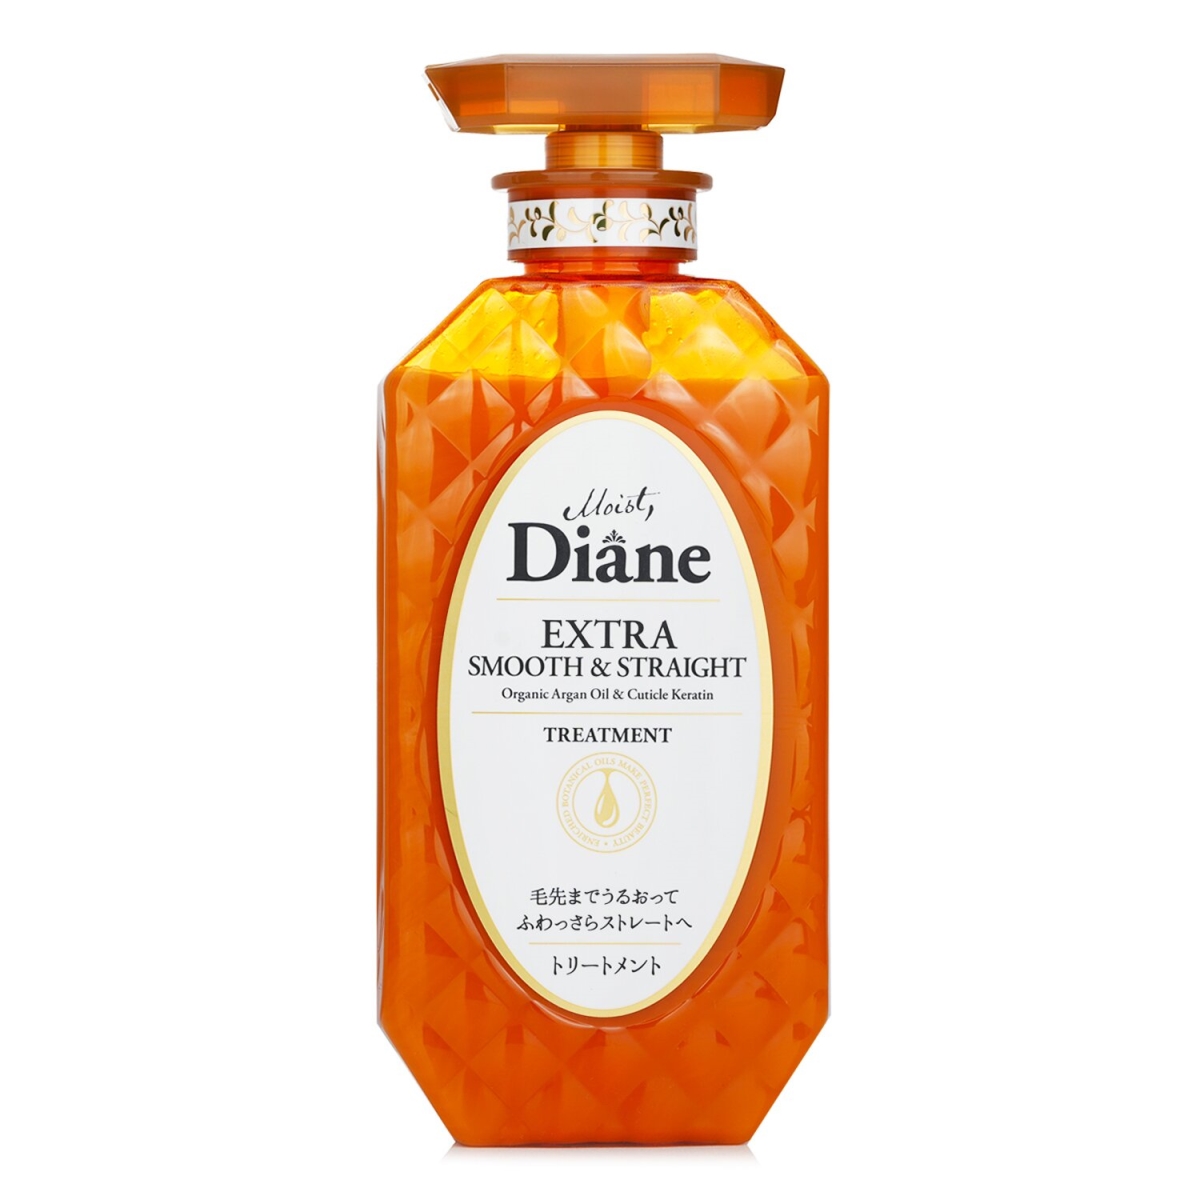 Picture of Moist Diane 304181 450 ml Extra Smooth & Straight Treatment